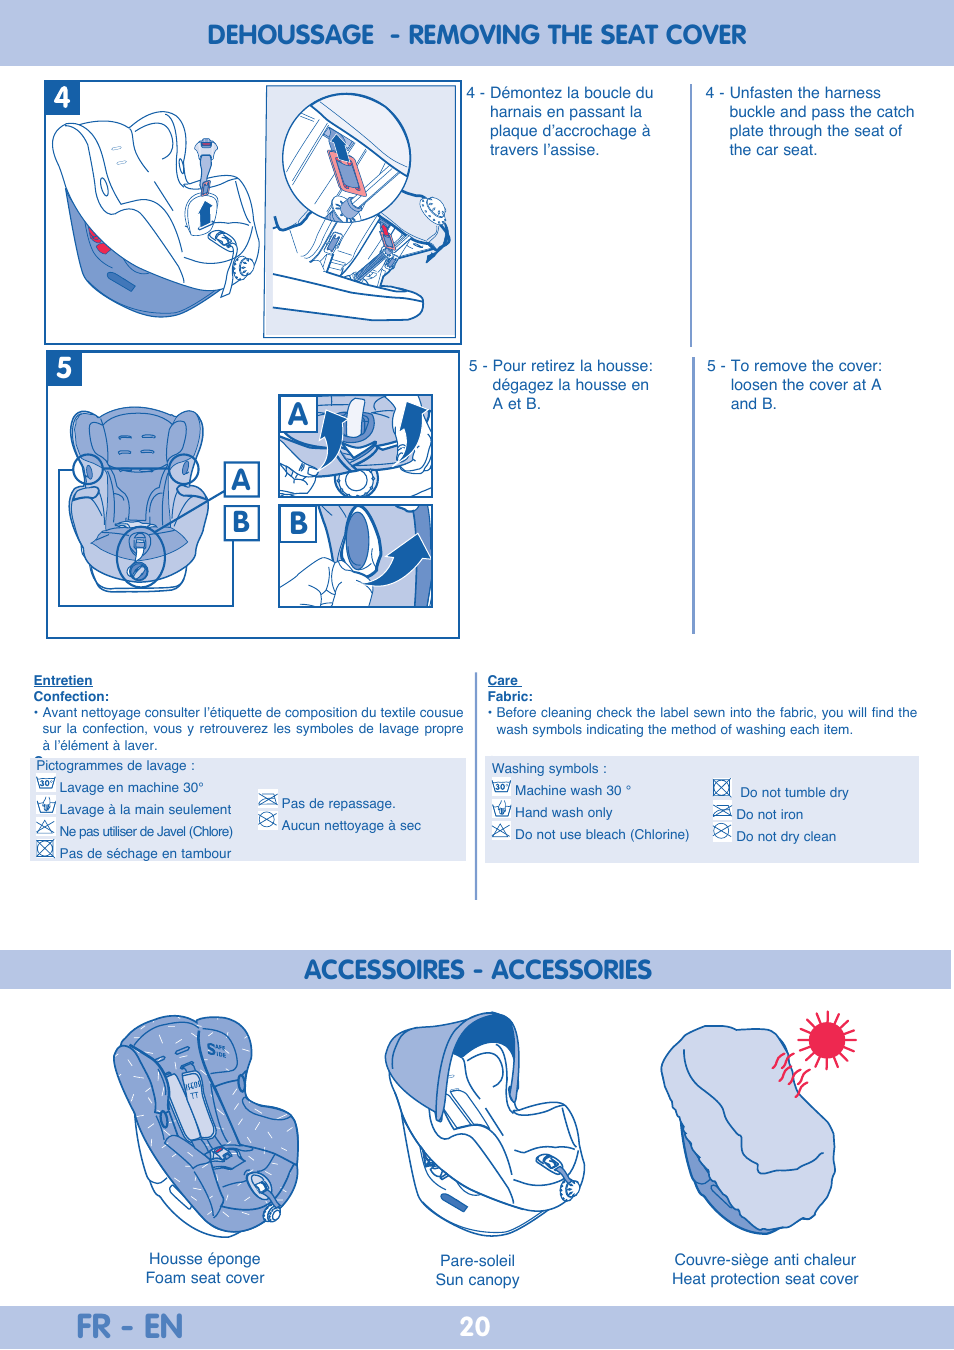 Fr En Dehoussage Removing The Seat Cover Accessoires Accessories Bebe Confort Iseos Isofix User Manual Page 40